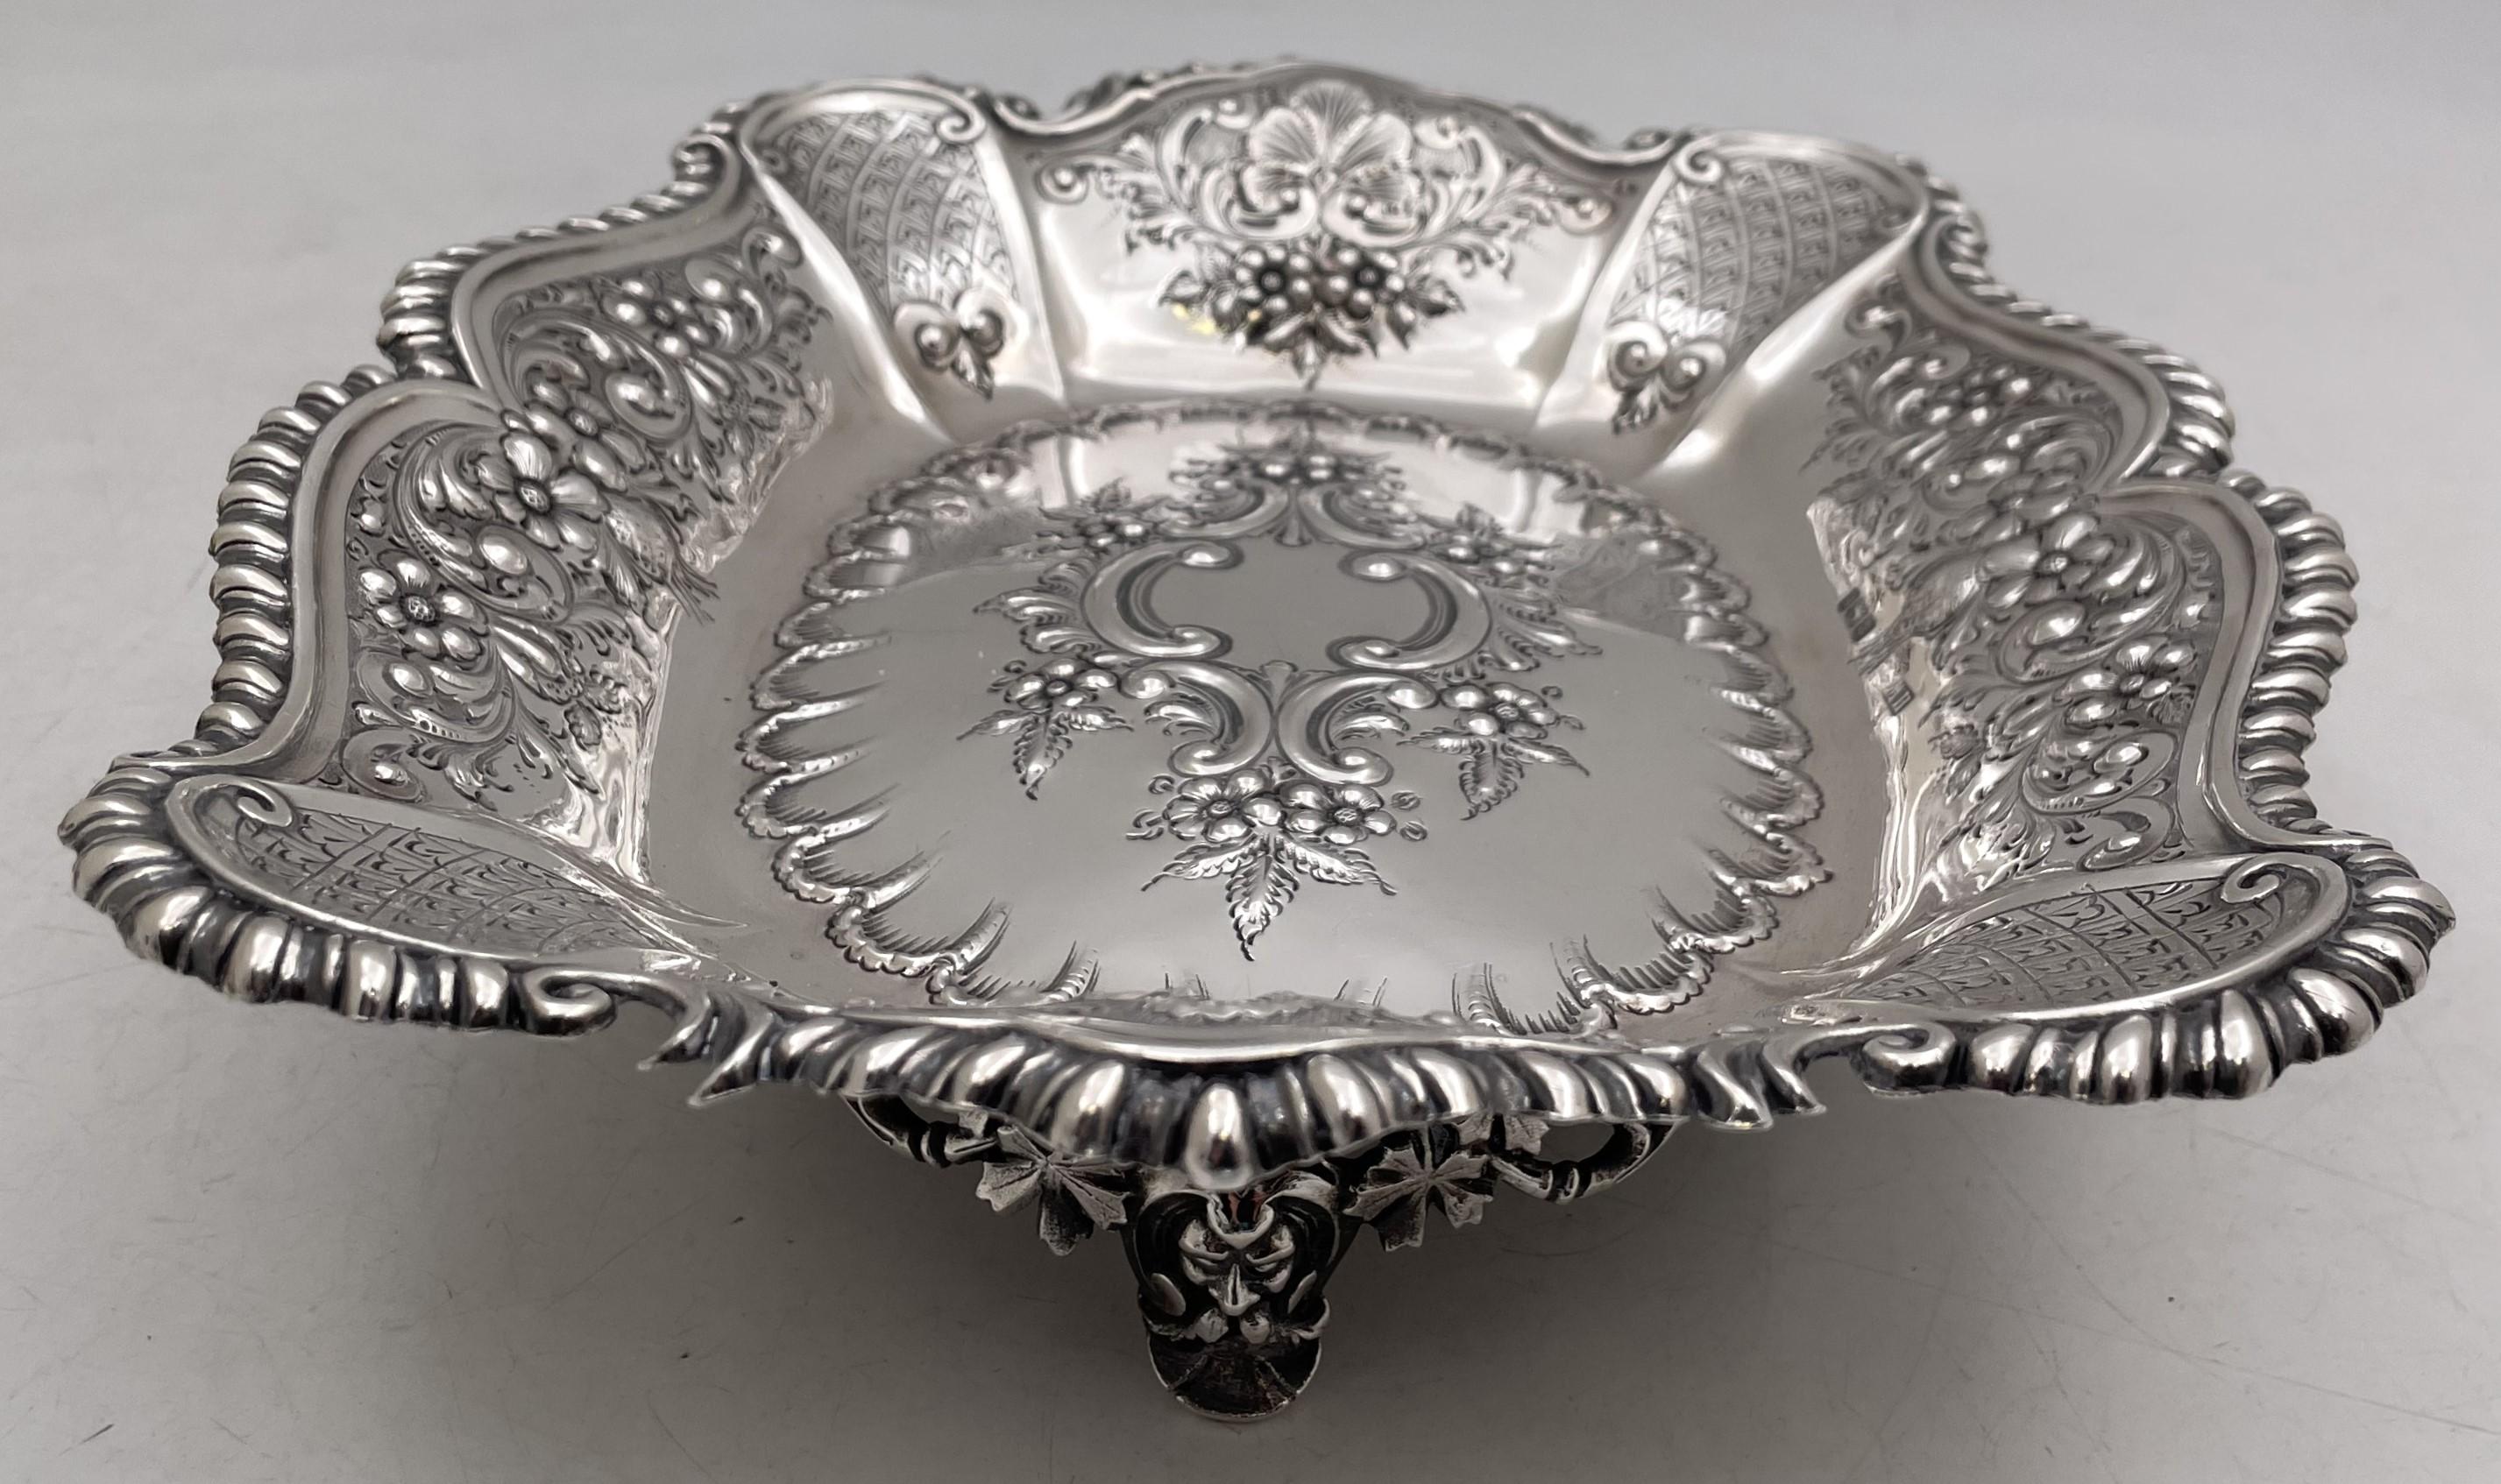 Lee & Wigfull English Sterling Silver 1902 Edwardian Bread Dish / Basket In Good Condition For Sale In New York, NY